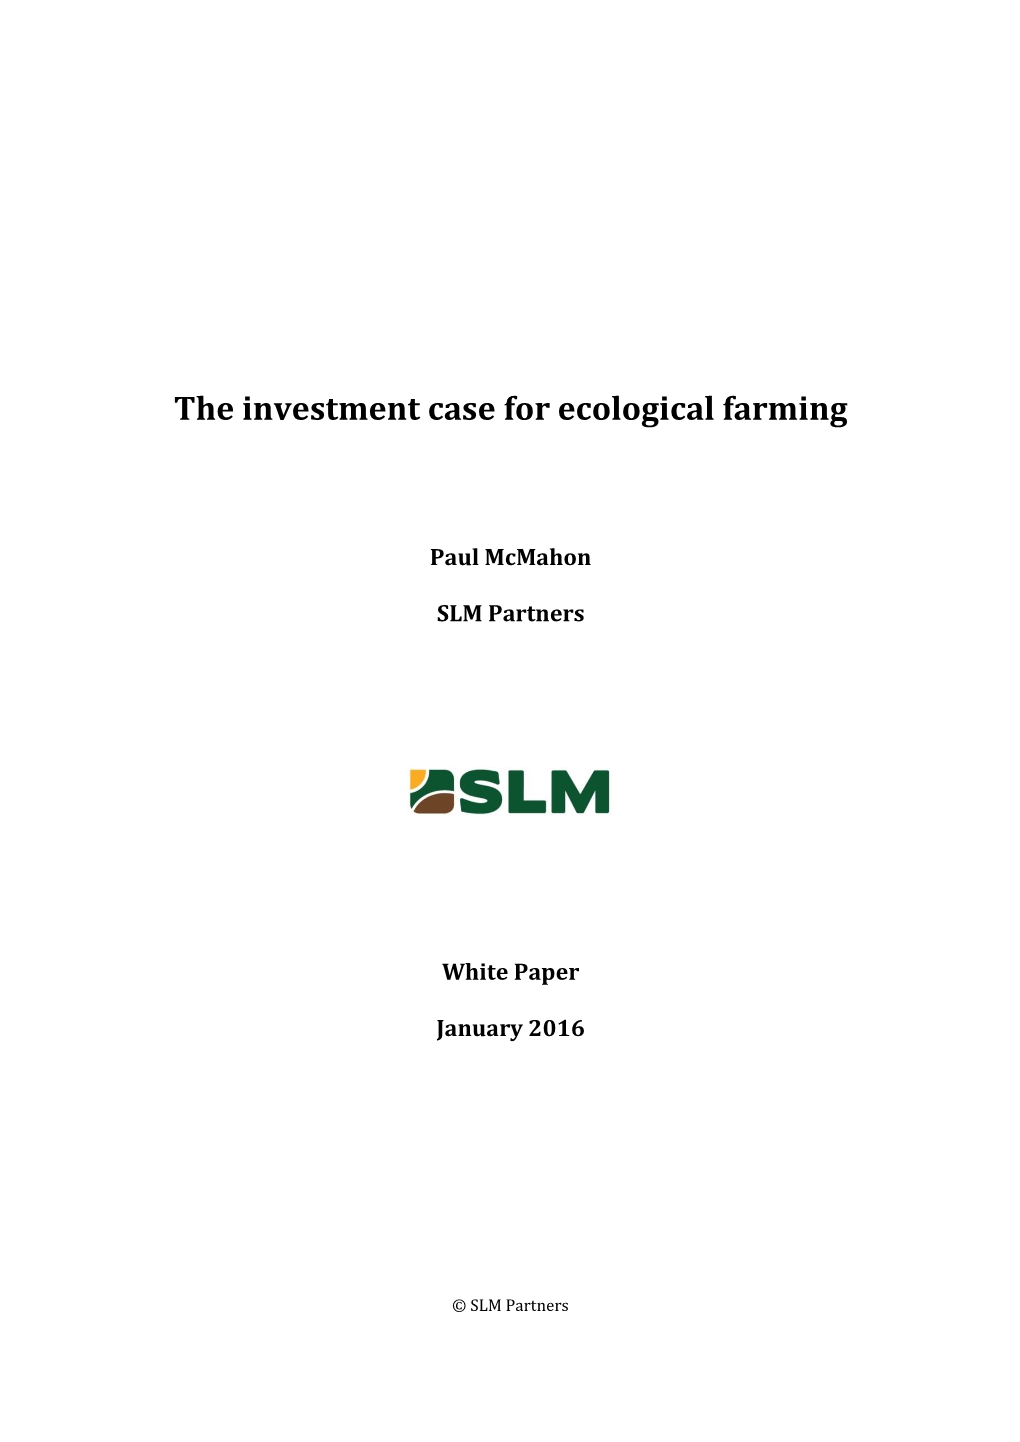 The Investment Case for Ecological Farming